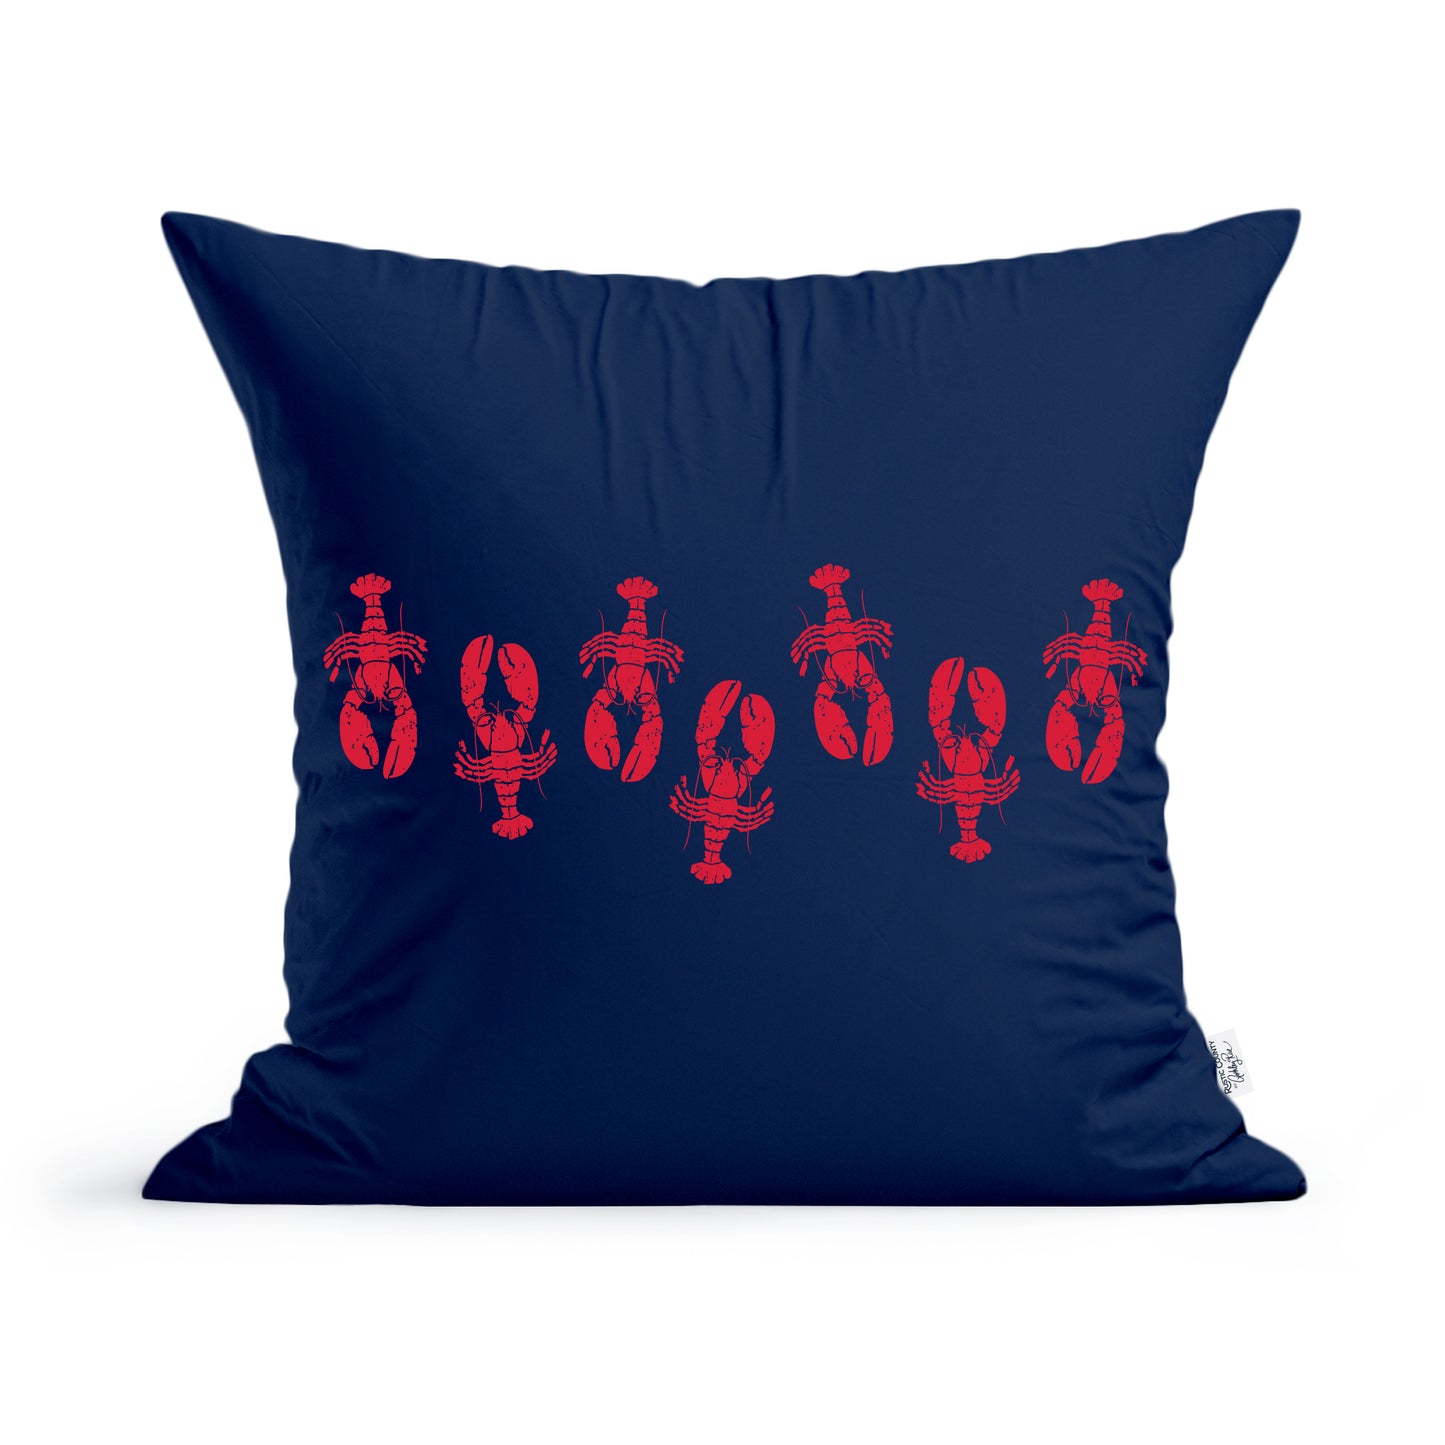 A navy blue Little Lobstahs Pillow from the Rustic County collection featuring a pattern of red lobsters arranged in a band around the center. The pillow has a soft texture, is machine washable.